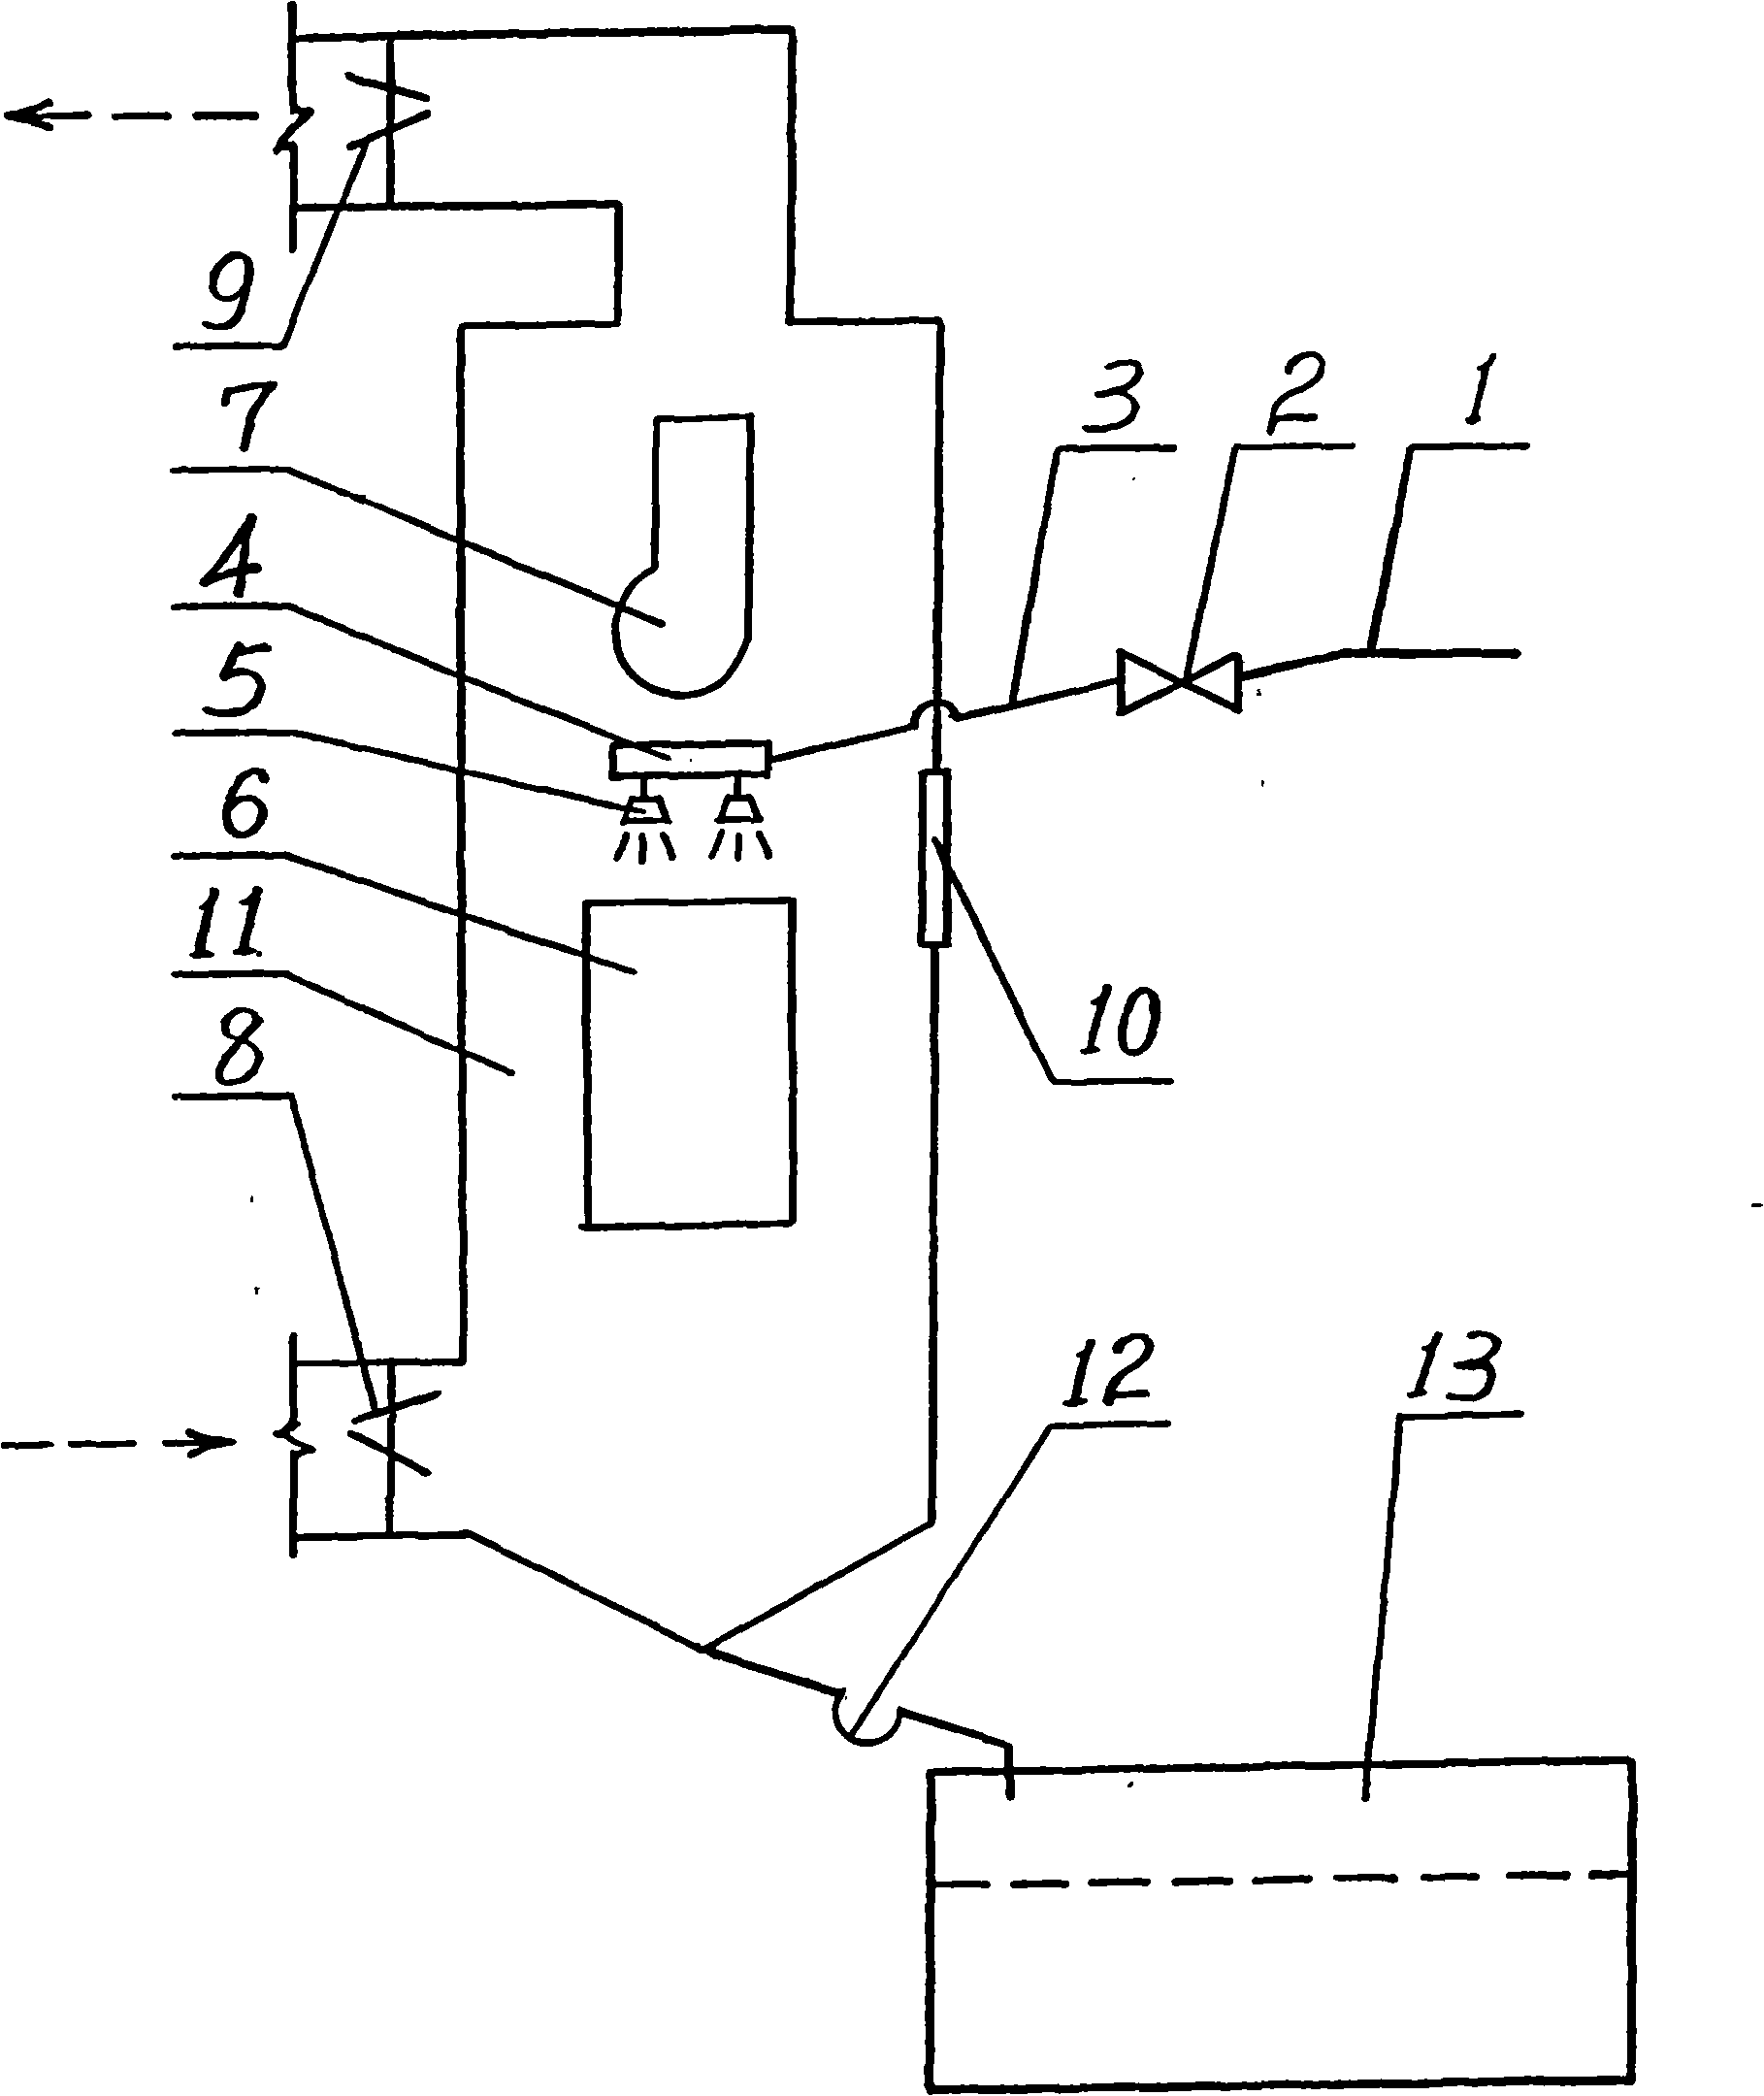 Cold storage water defrost and defrosting water as well as defrosting water recycle apparatus